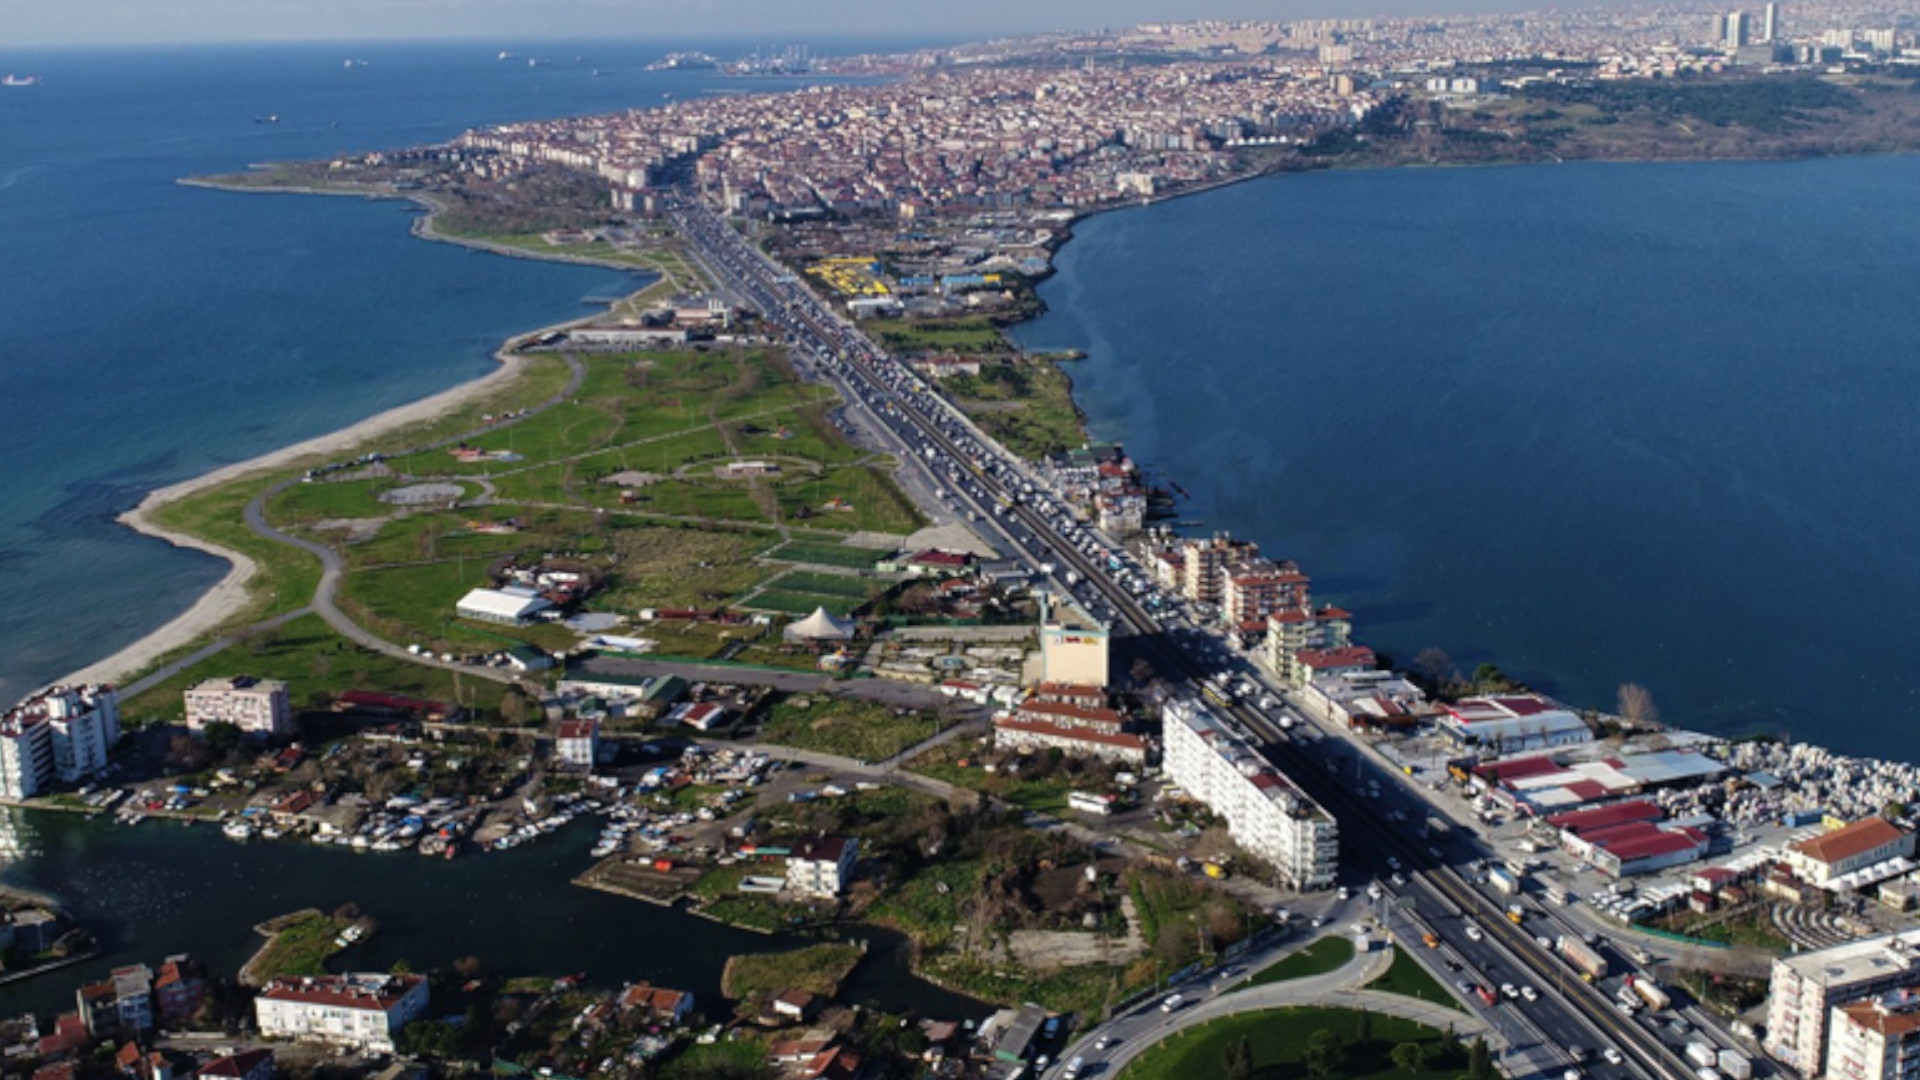 Erdoğan's delirious canal project: Istanbul is on sale